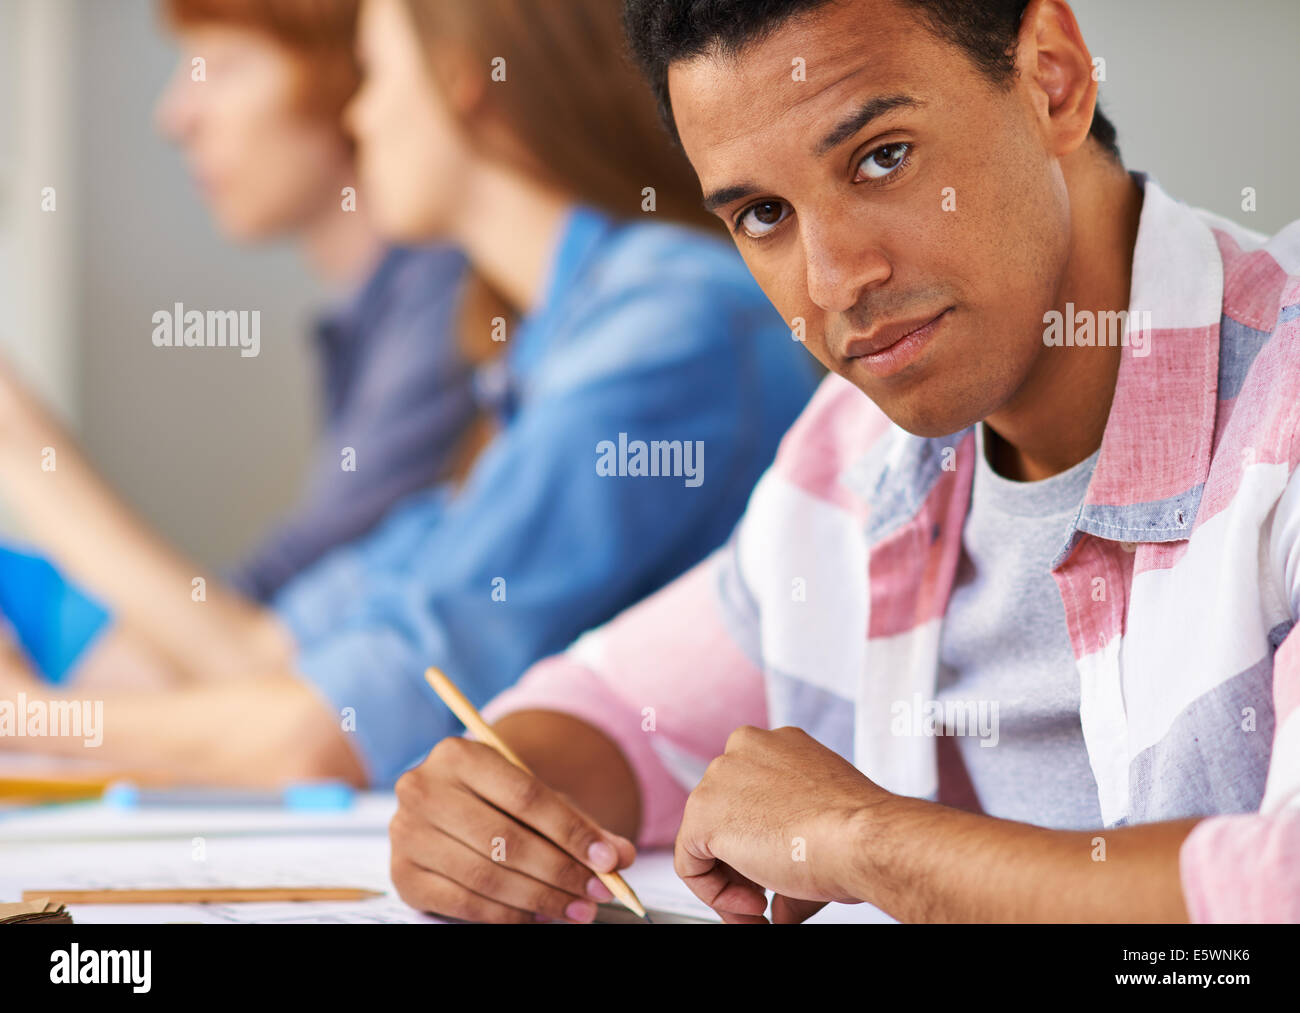 Smart guy looking at camera while sitting at lesson Stock Photo